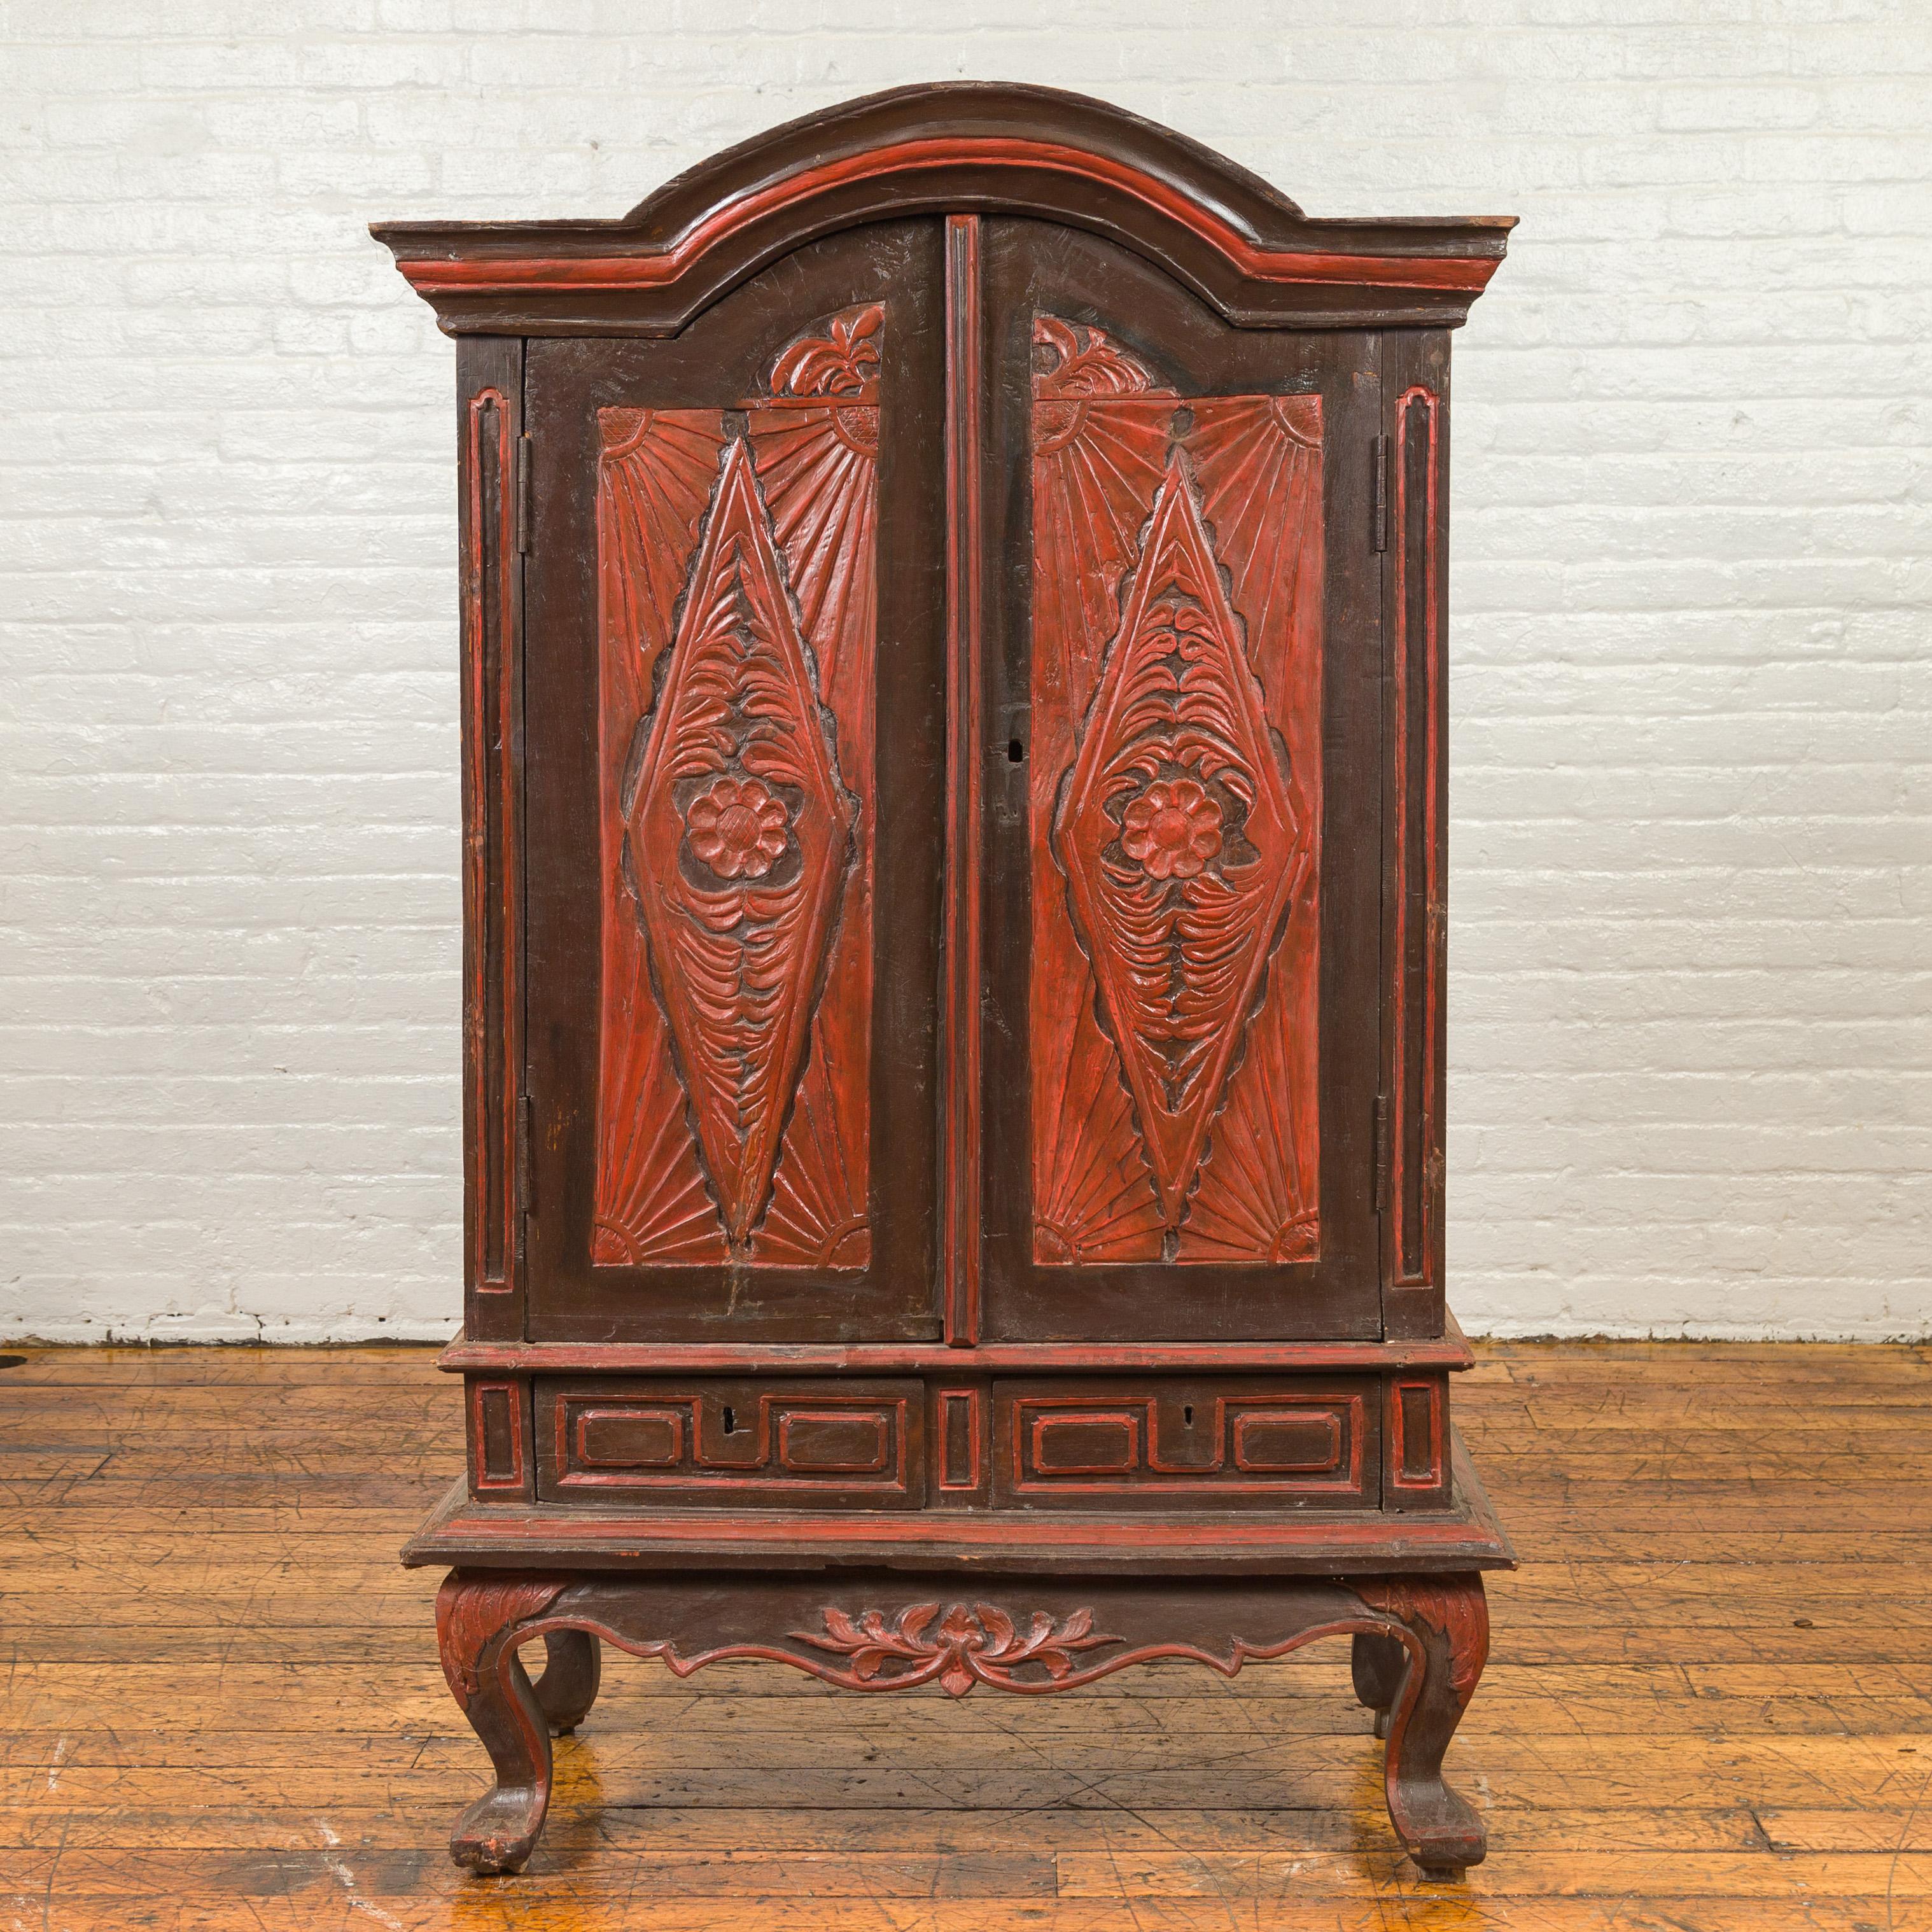 An antique Dutch Colonial cabinet from the late 19th century, with bonnet top, carved panels, cabriole legs and cinnabar / black patina. Crafted in Indonesia during the later years of the 19th century, this cabinet features a bonnet top sitting